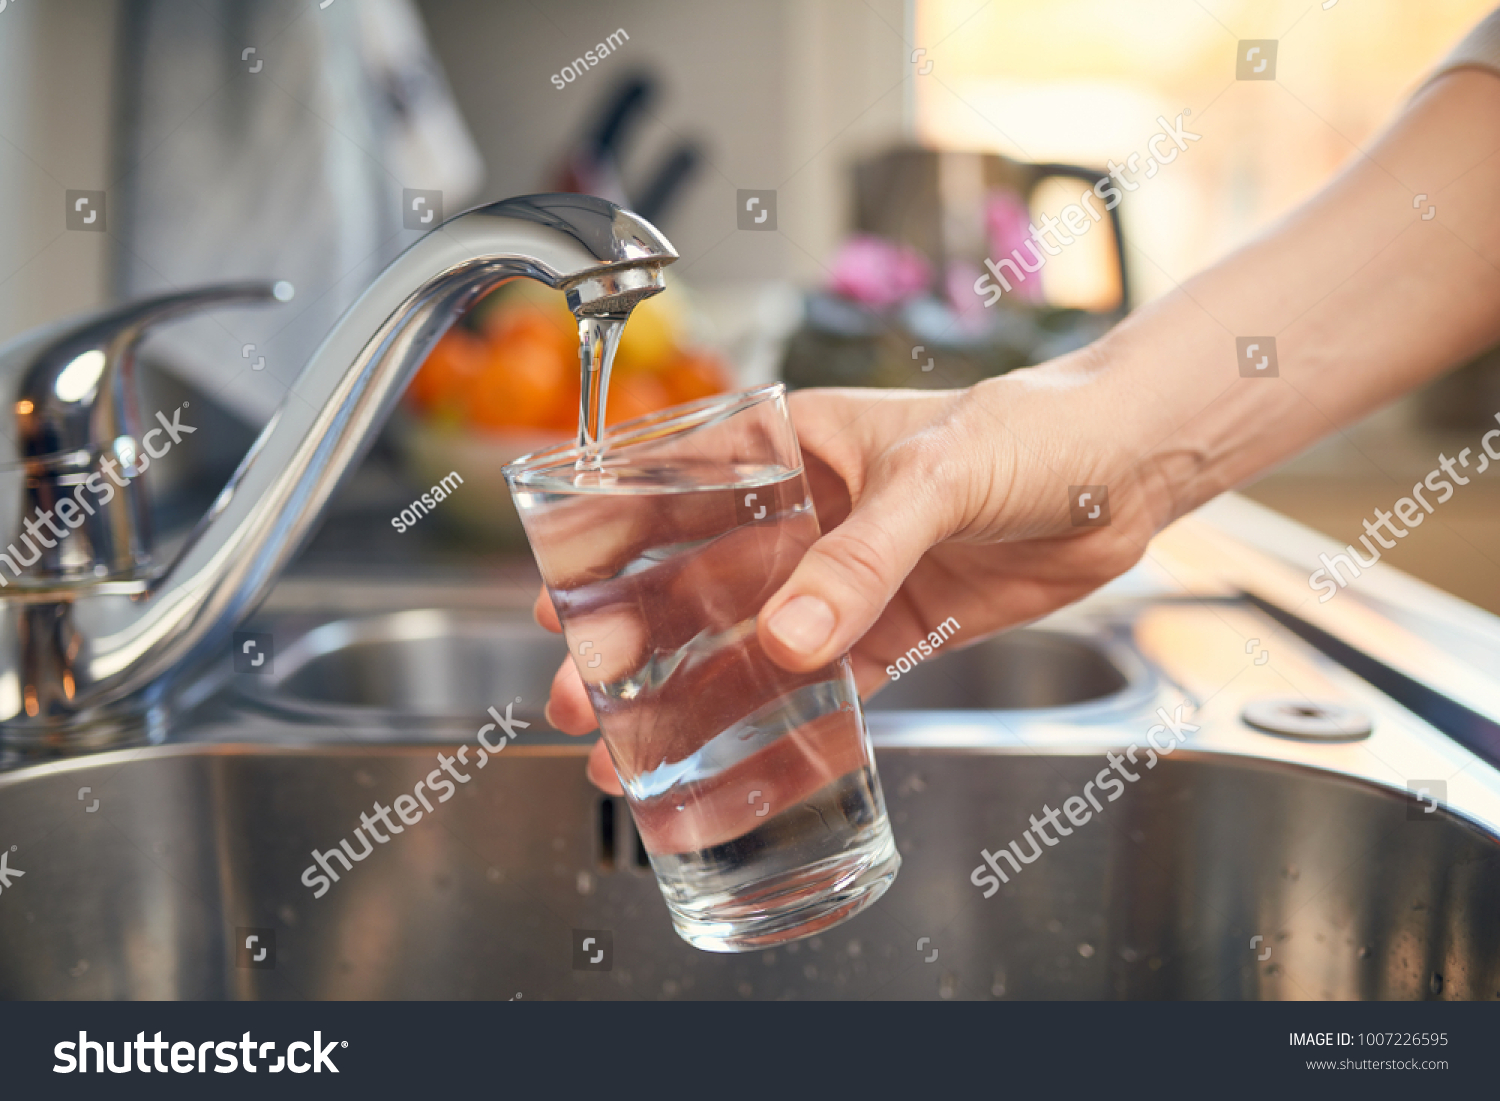 Pouring Fresh Tap Water Into a Glass  #1007226595